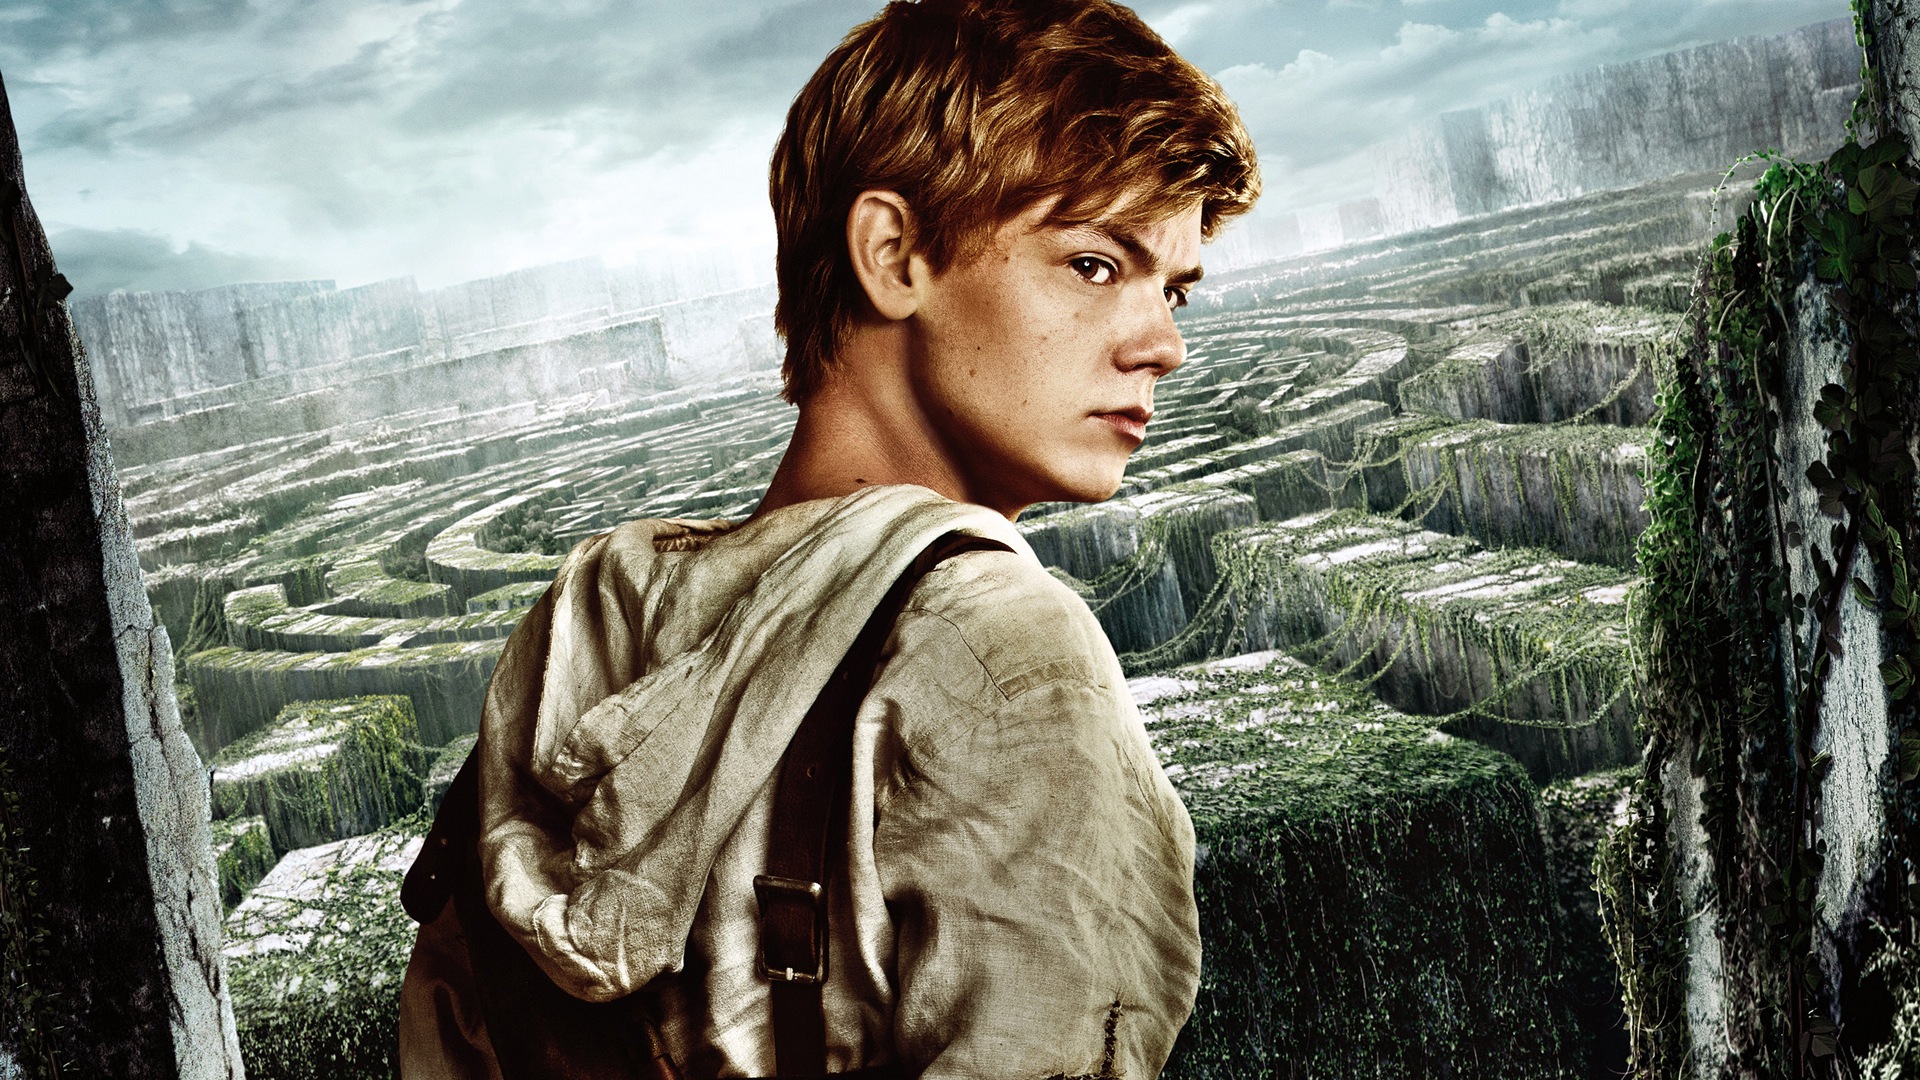 The Maze Runner HD movie wallpapers #8 - 1920x1080